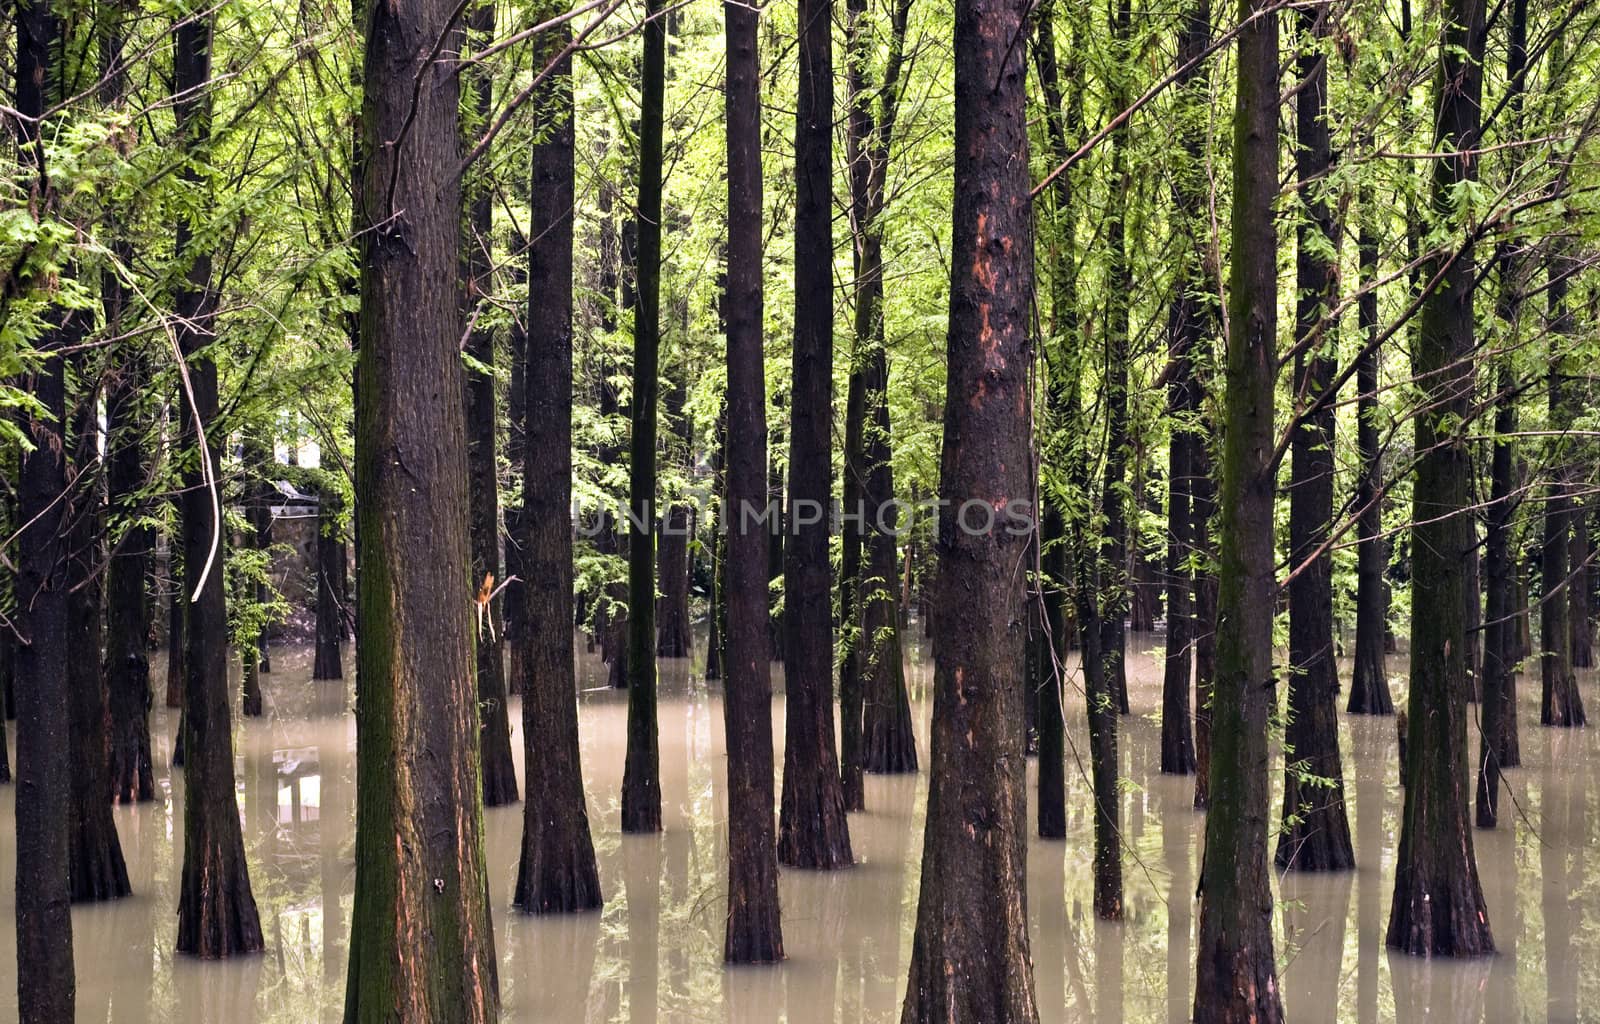 Trees in the water travel photograph taken in China